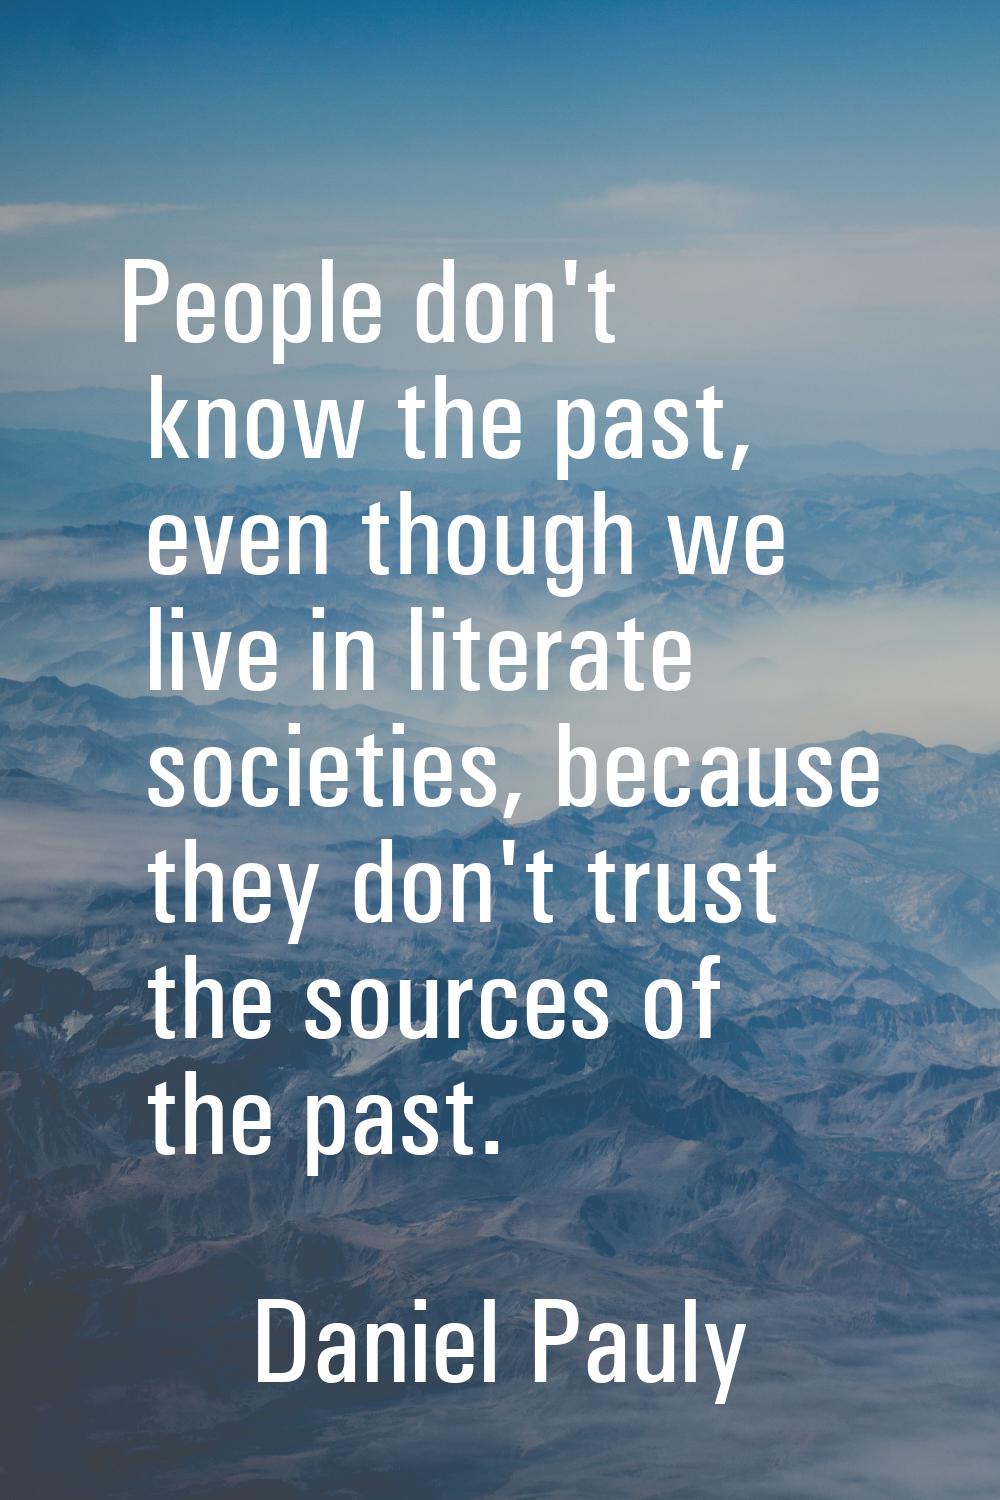 People don't know the past, even though we live in literate societies, because they don't trust the